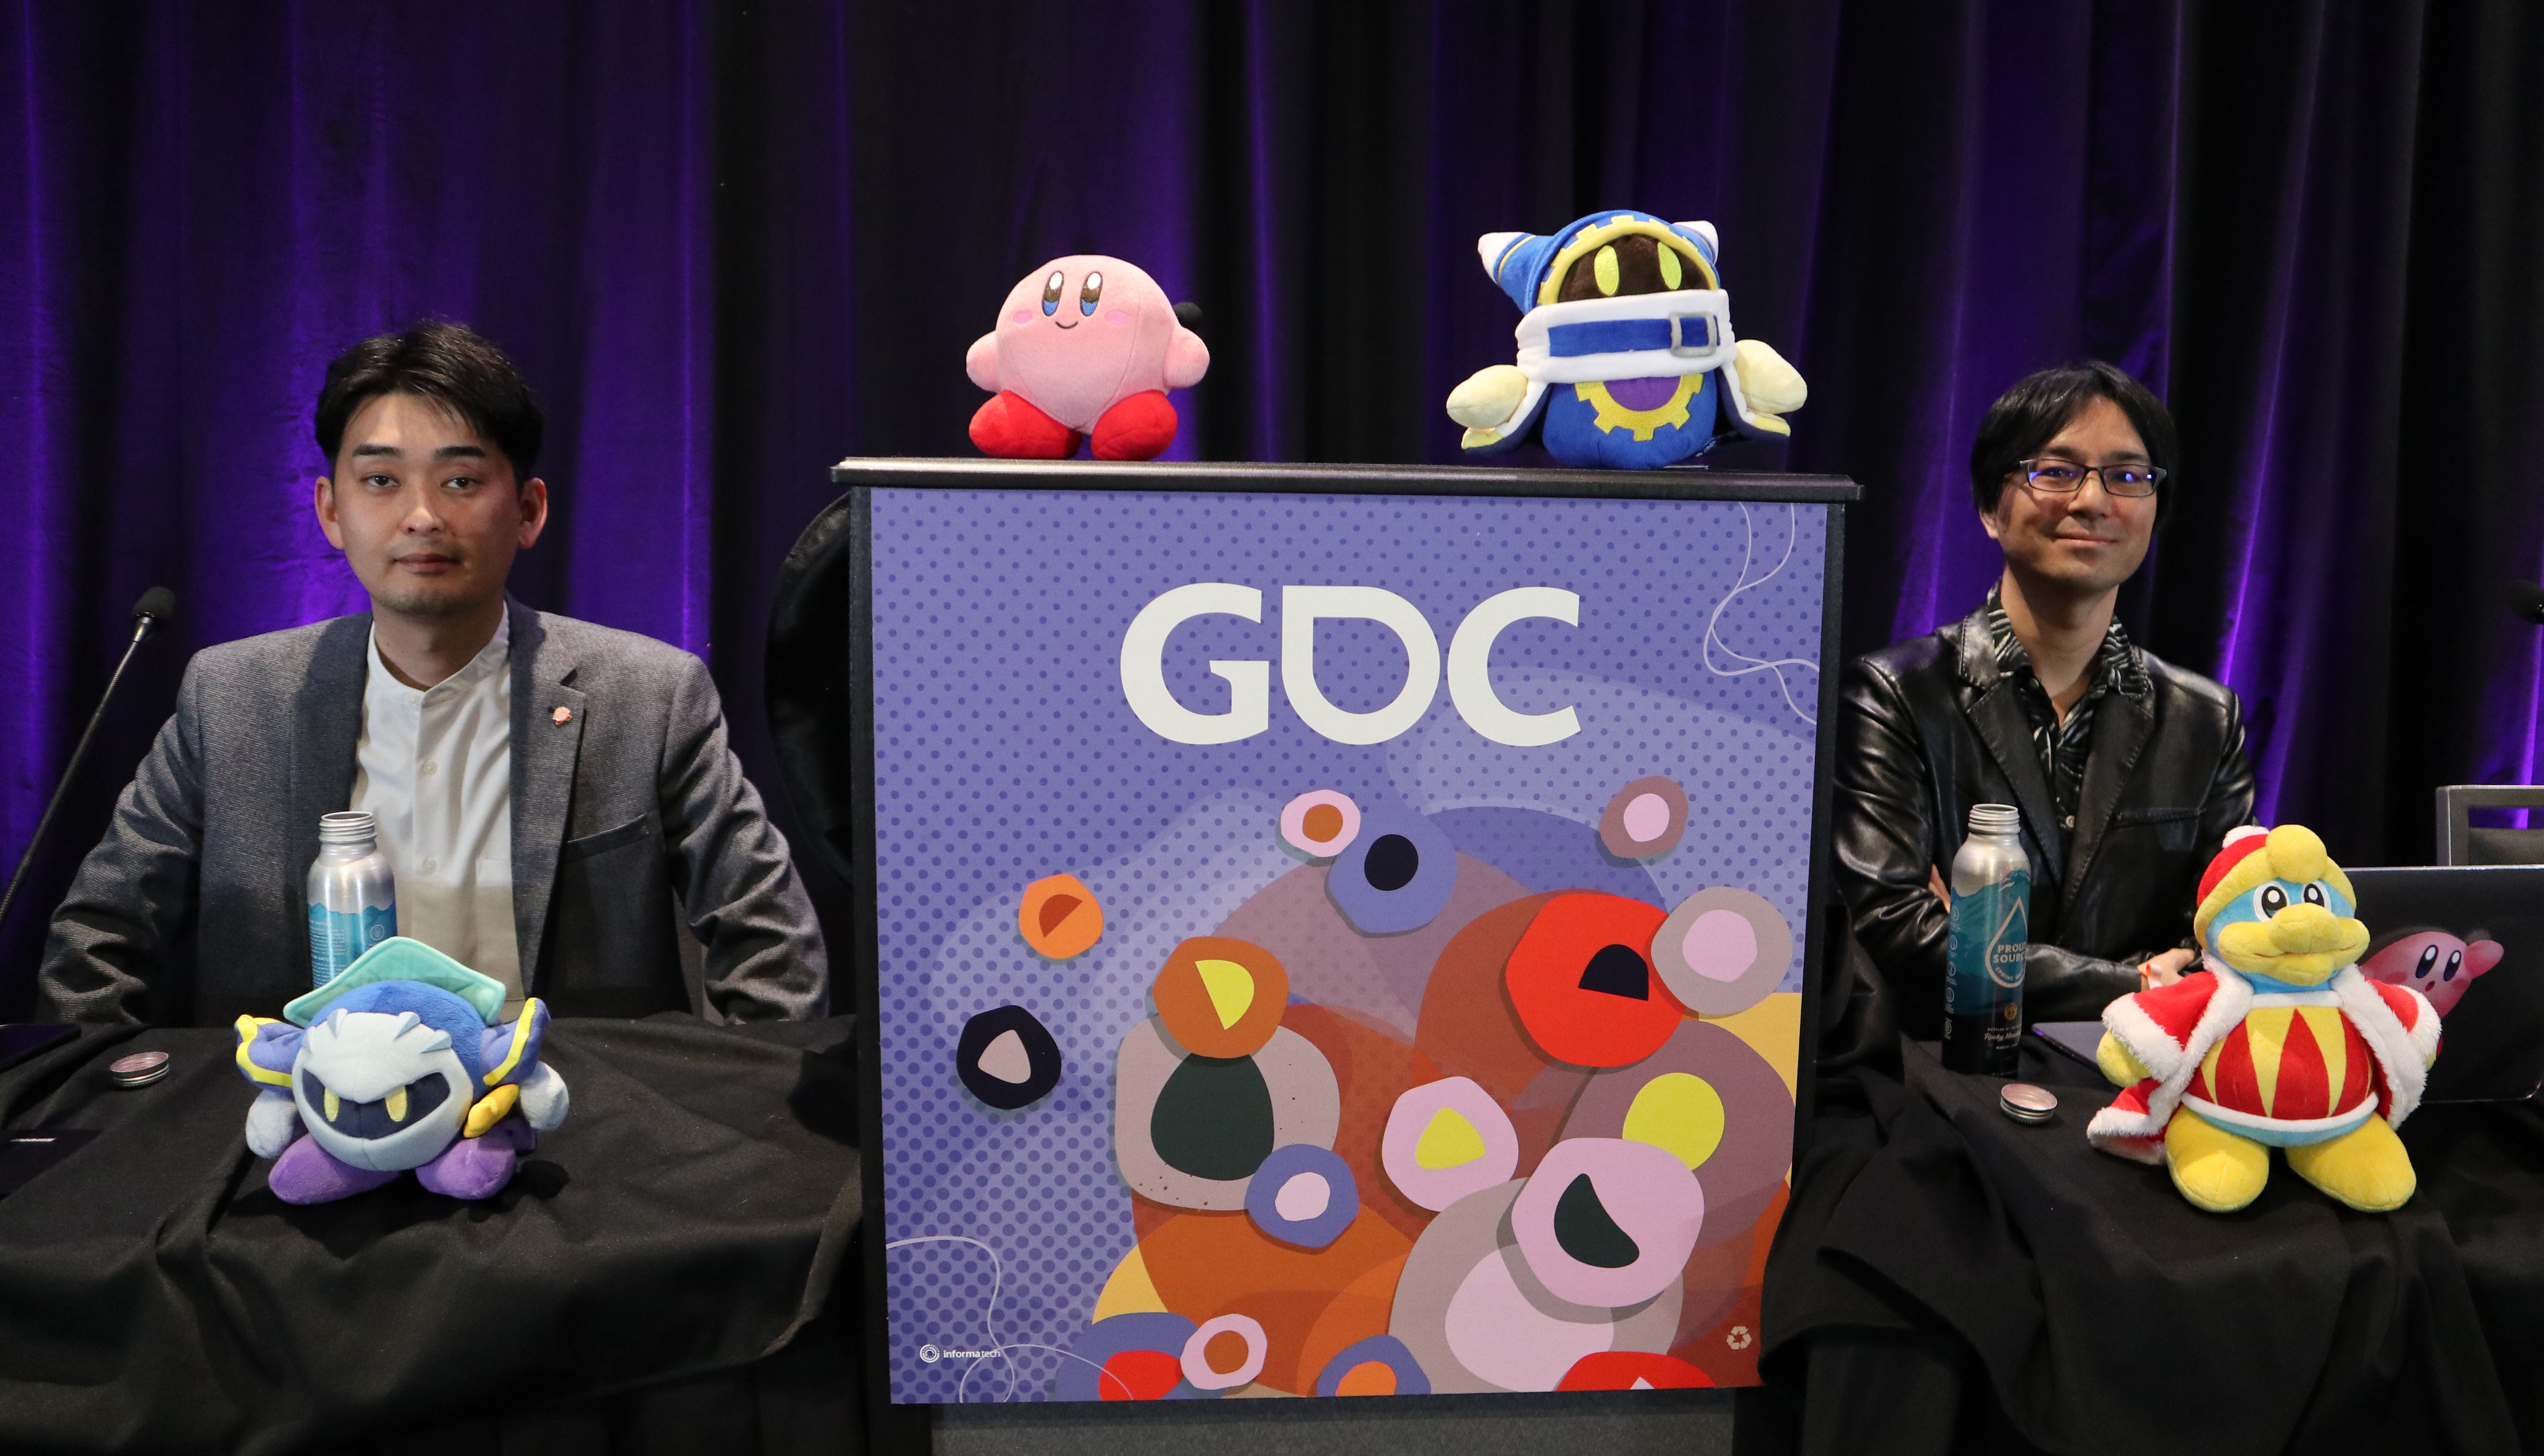 Kirby's creators on developing accessible games, and the darker